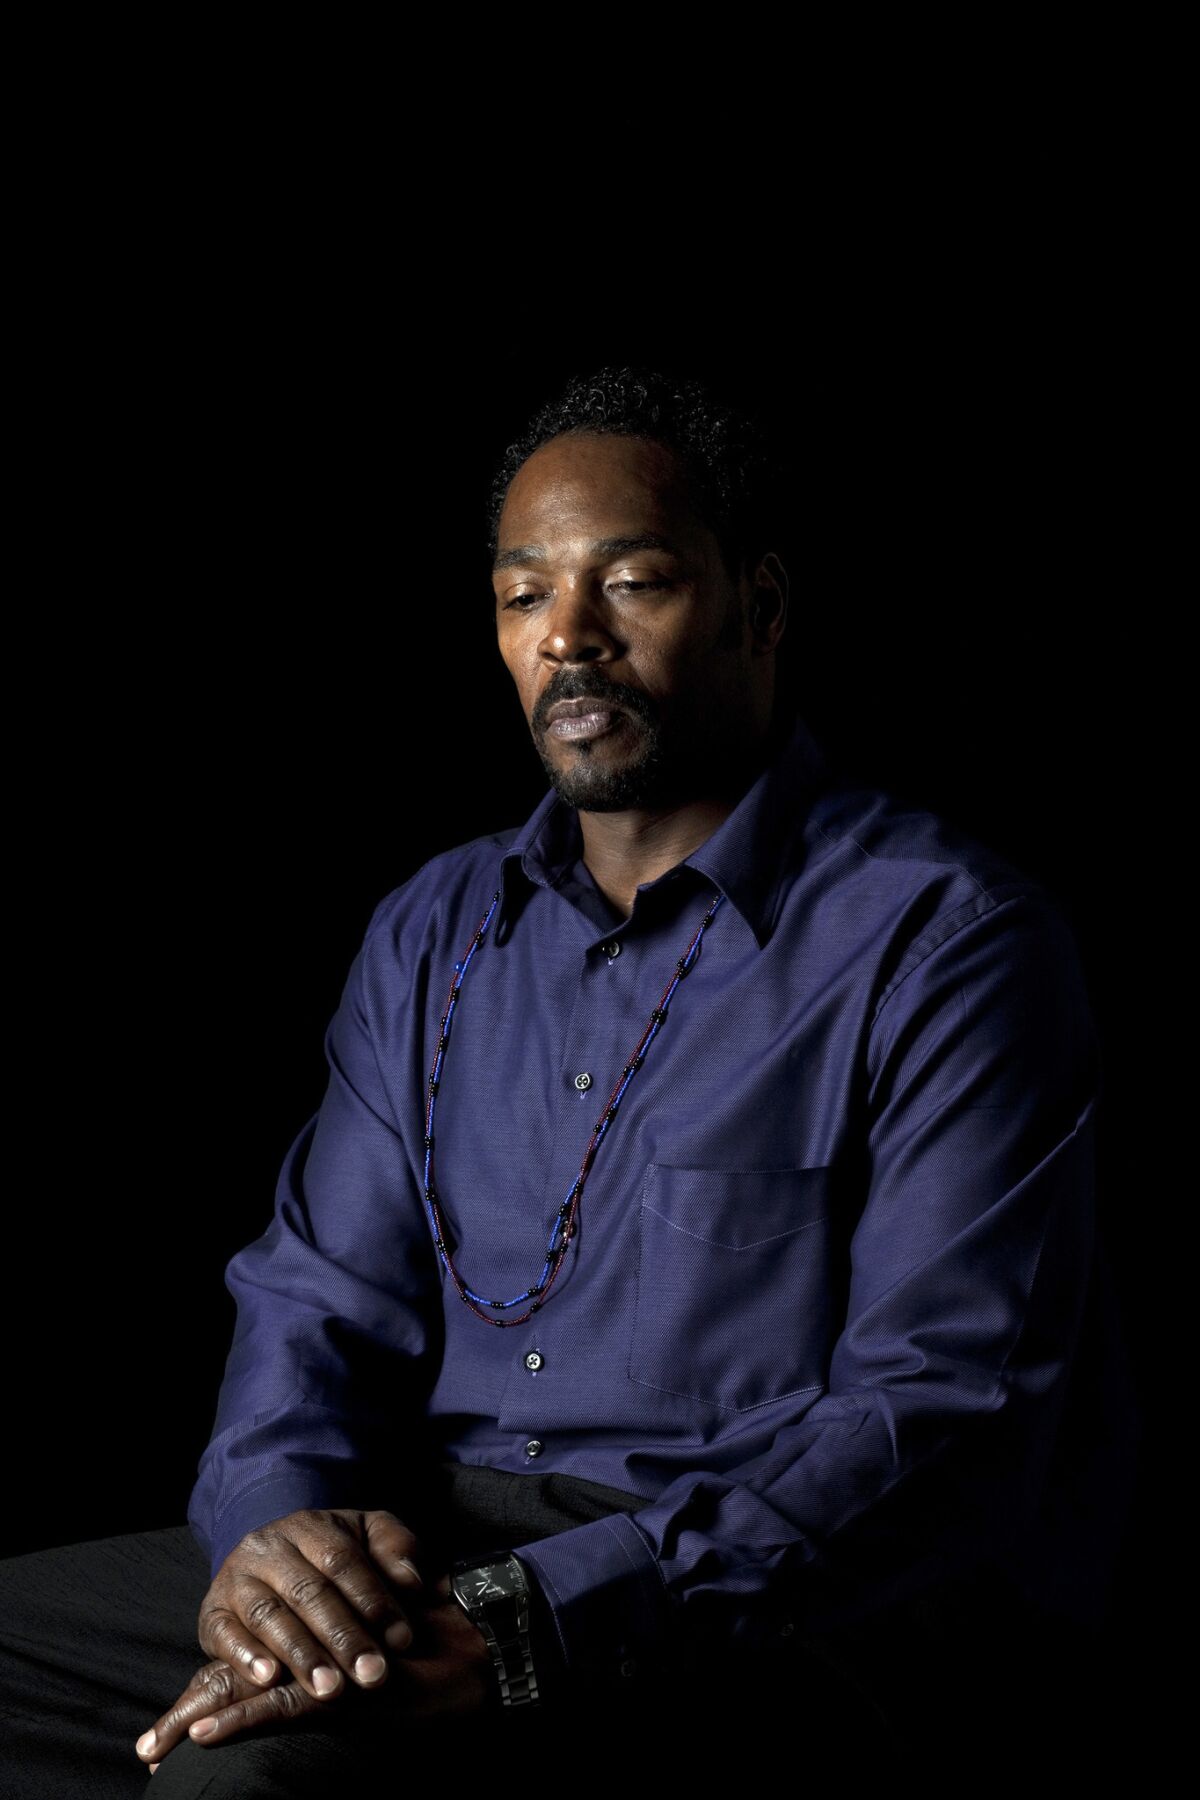 Rodney King in the Los Angeles Times studio.